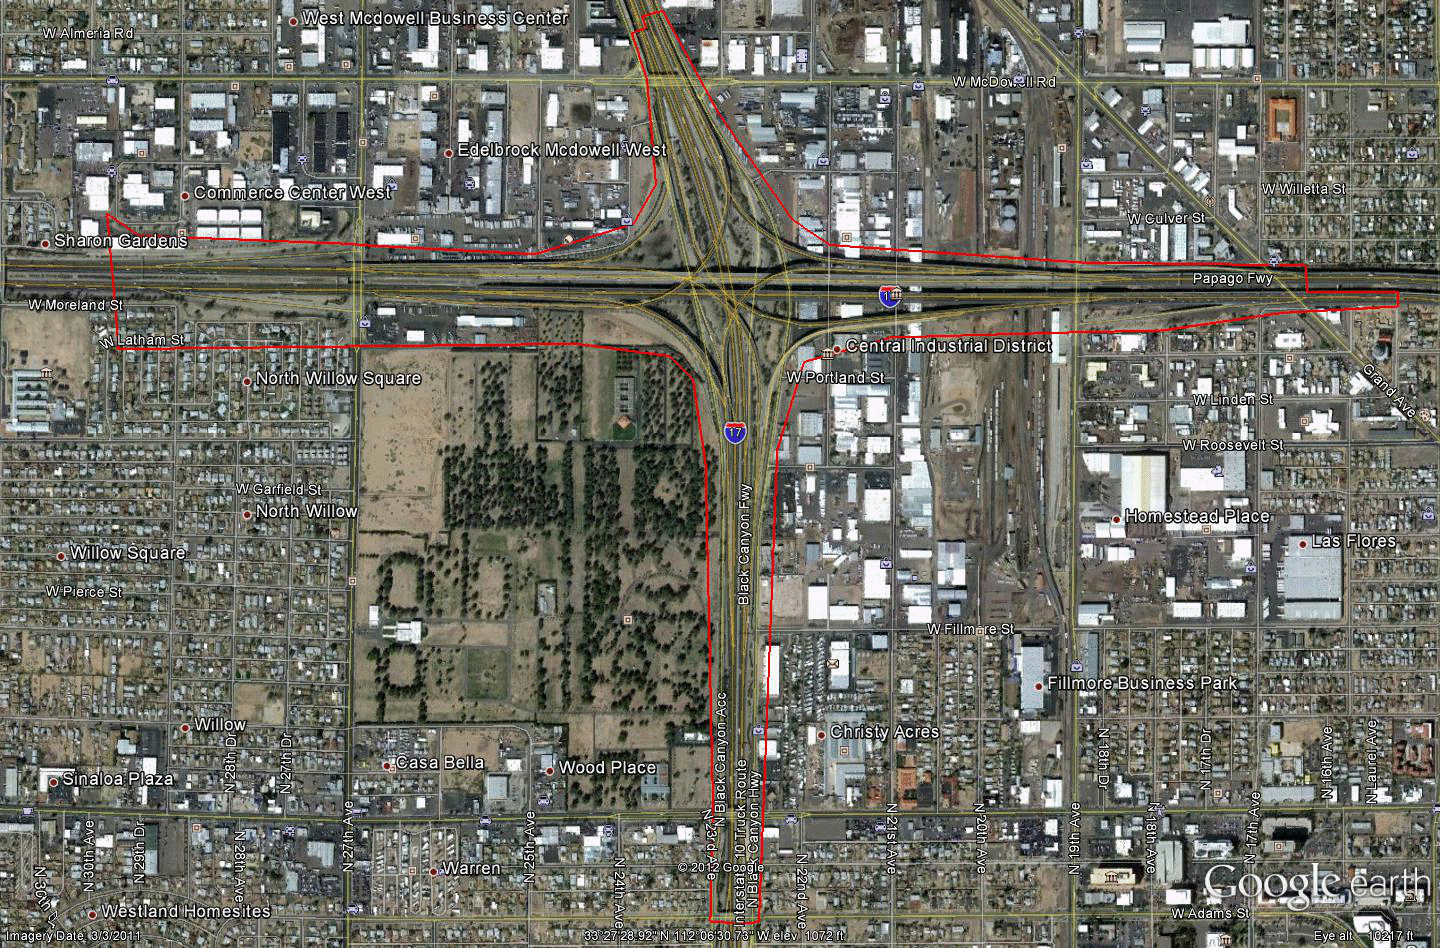 Figure 80. Photo. Aerial view of site AZ-1. This figure shows an aerial photo of the interchange of I-10 with I-17/US-60 in Phoenix, AZ. The study limits along each route were drawn on the aerial photograph. 